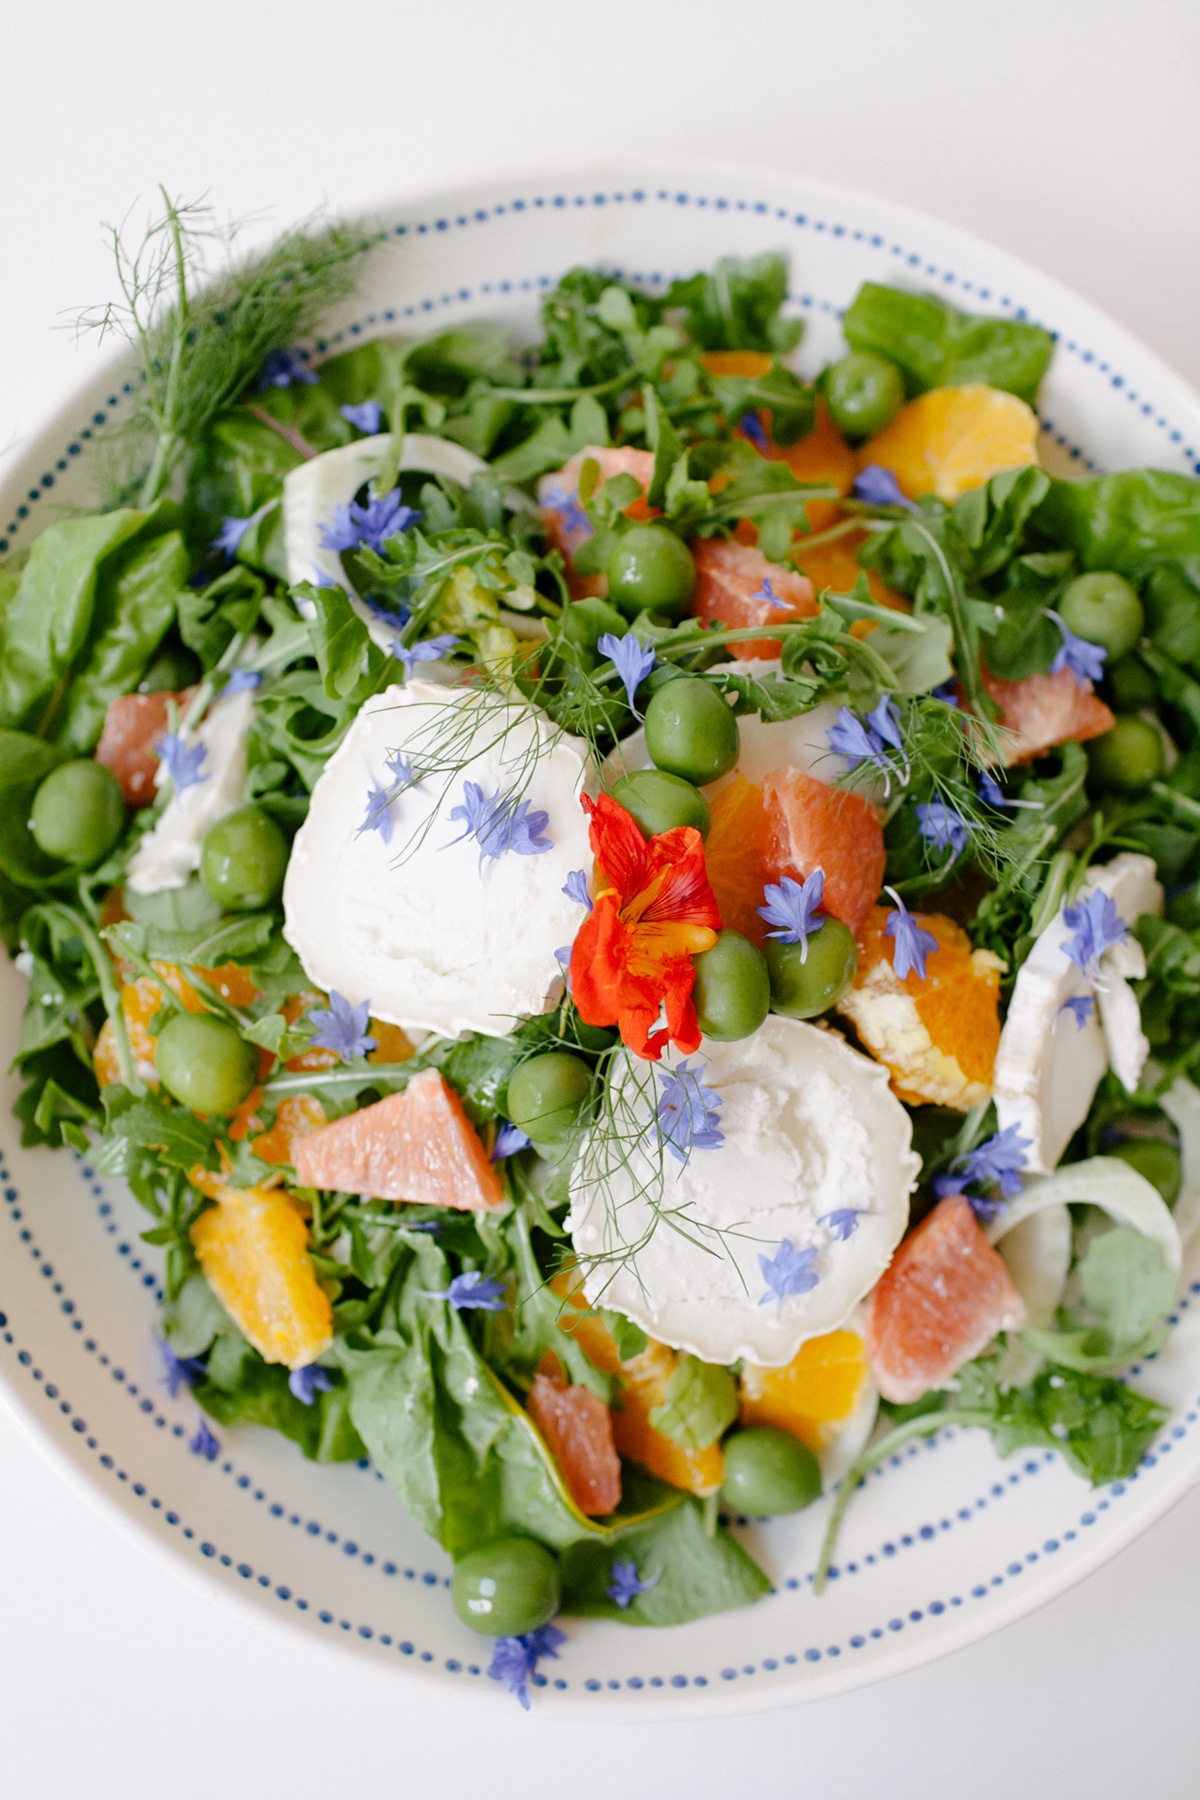 a fresh summer salad recipe with fennel, citrus, edible flowers, and more | recipe via coco kelley